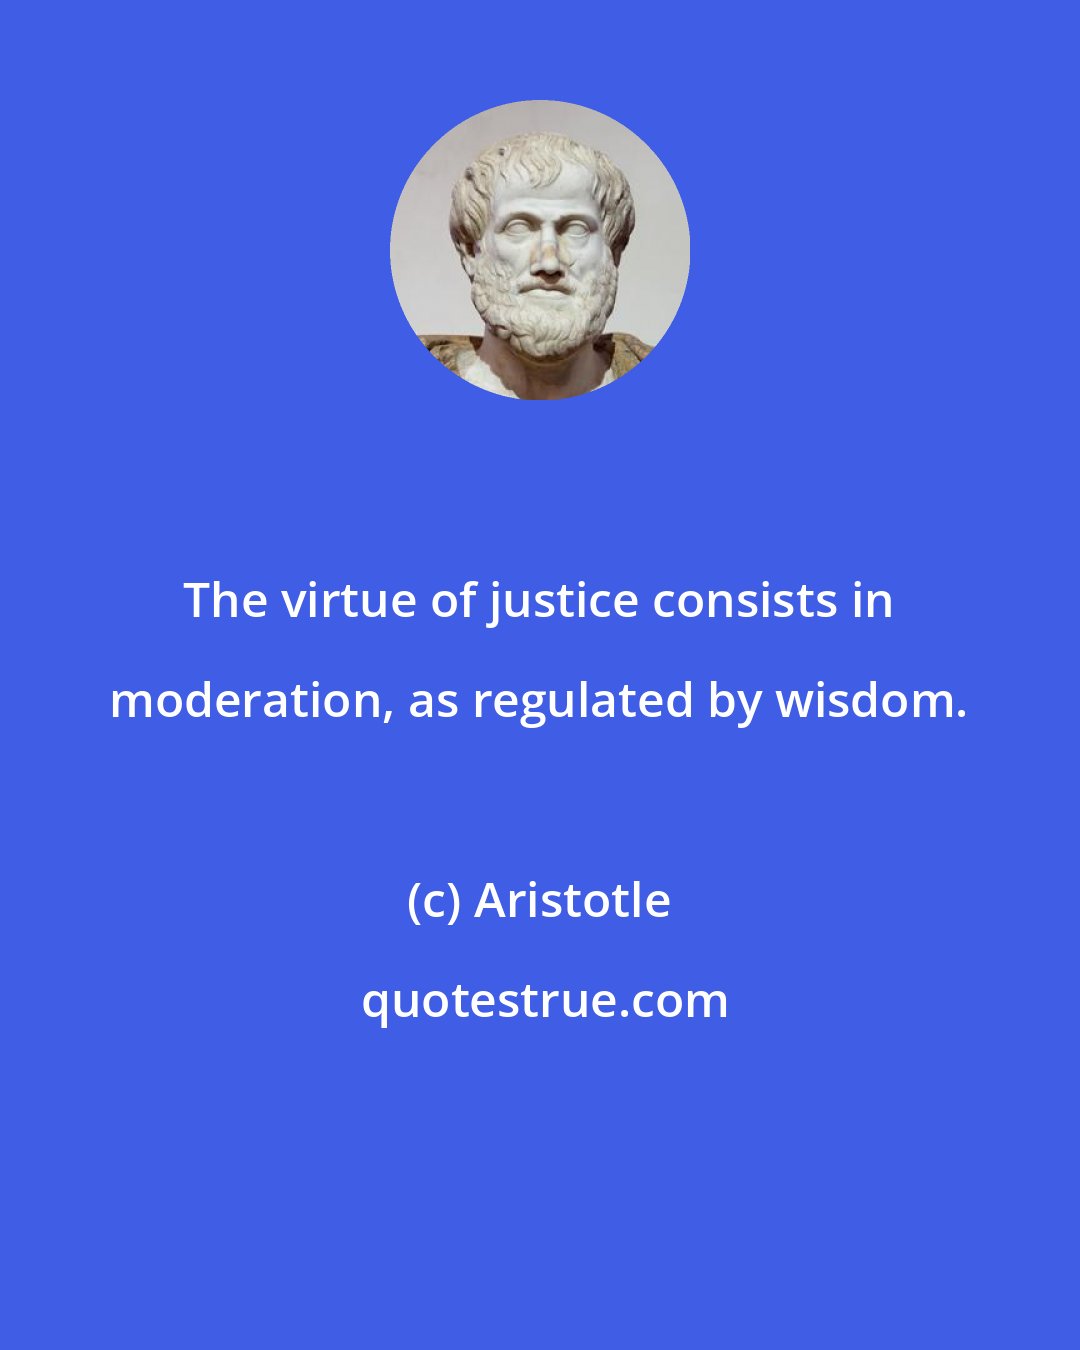 Aristotle: The virtue of justice consists in moderation, as regulated by wisdom.